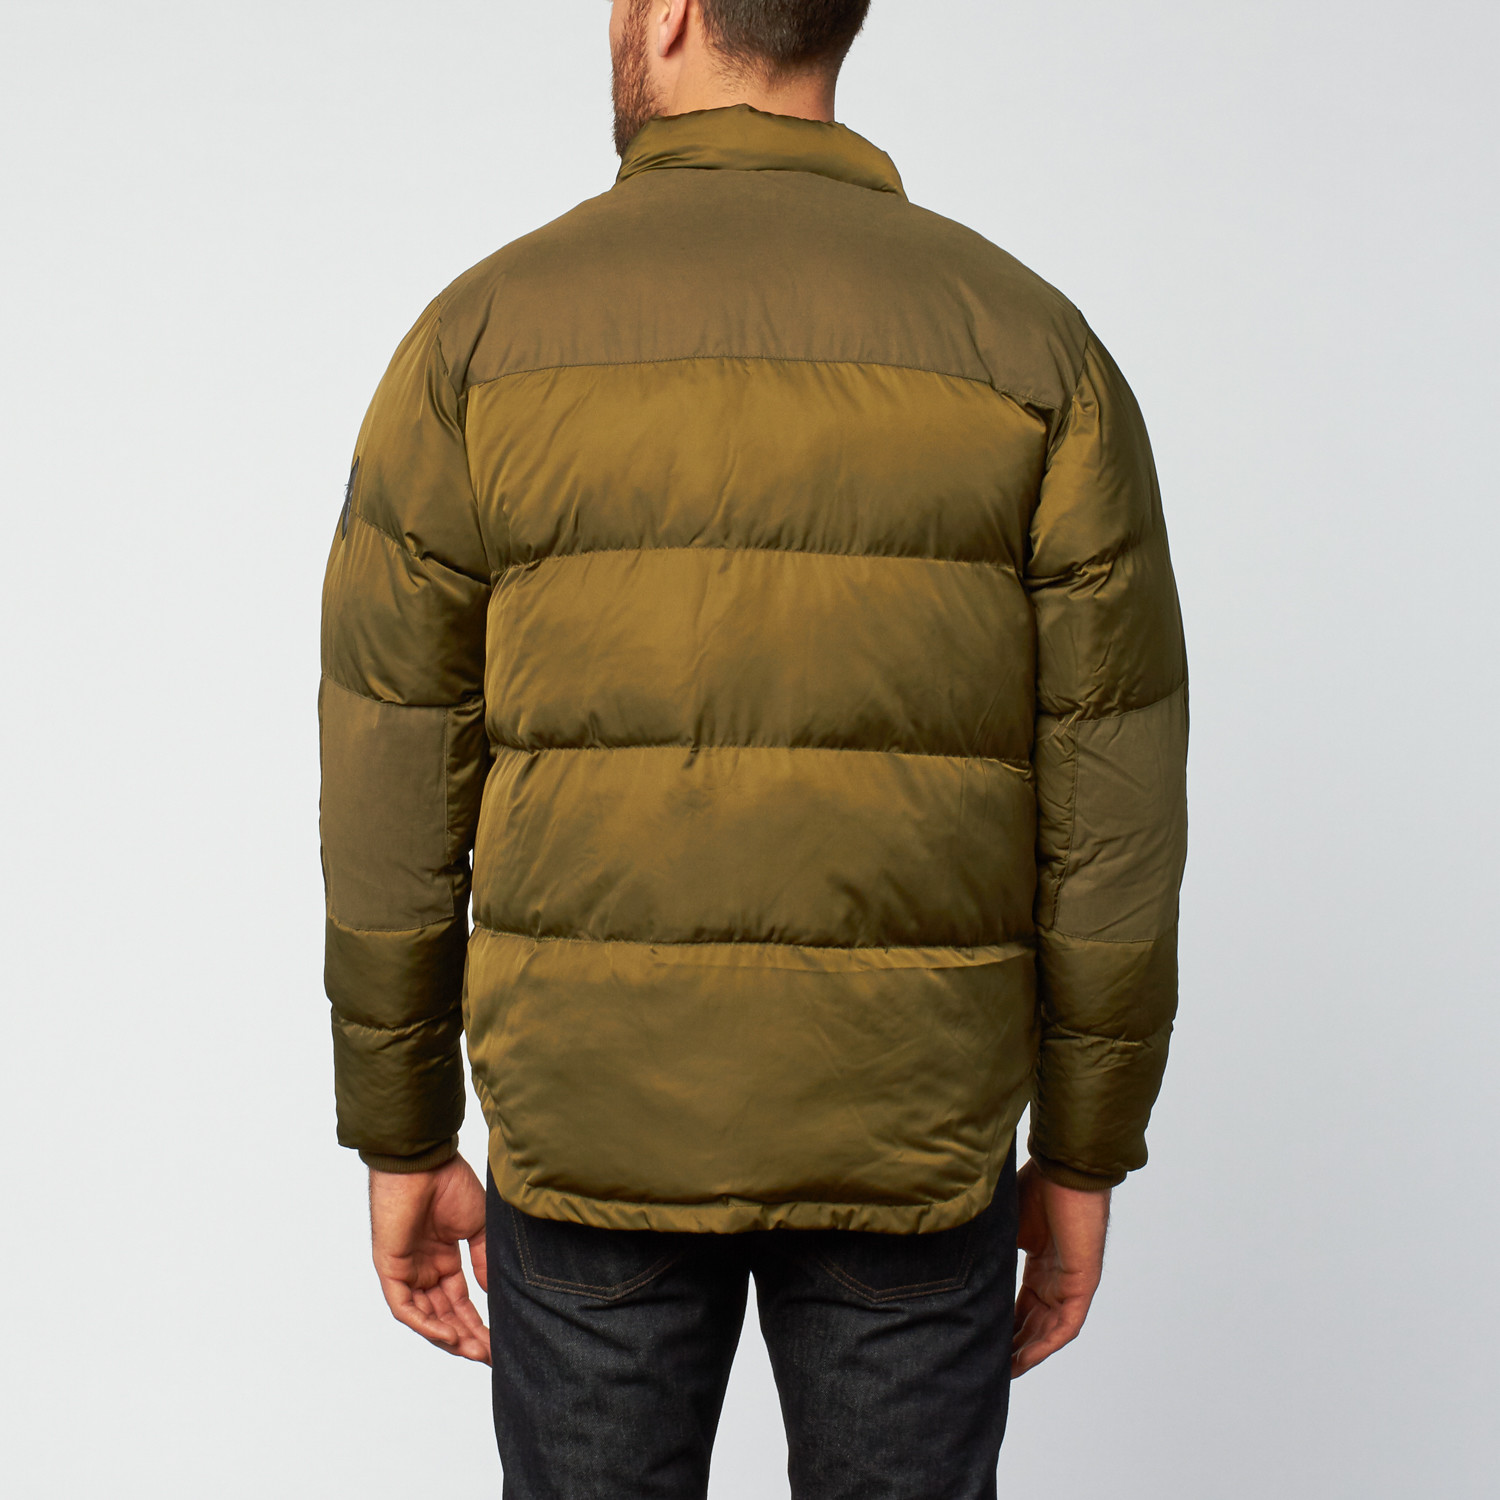 Canada Bubble Jacket // Army Green (S) Fat Moose Touch of Modern